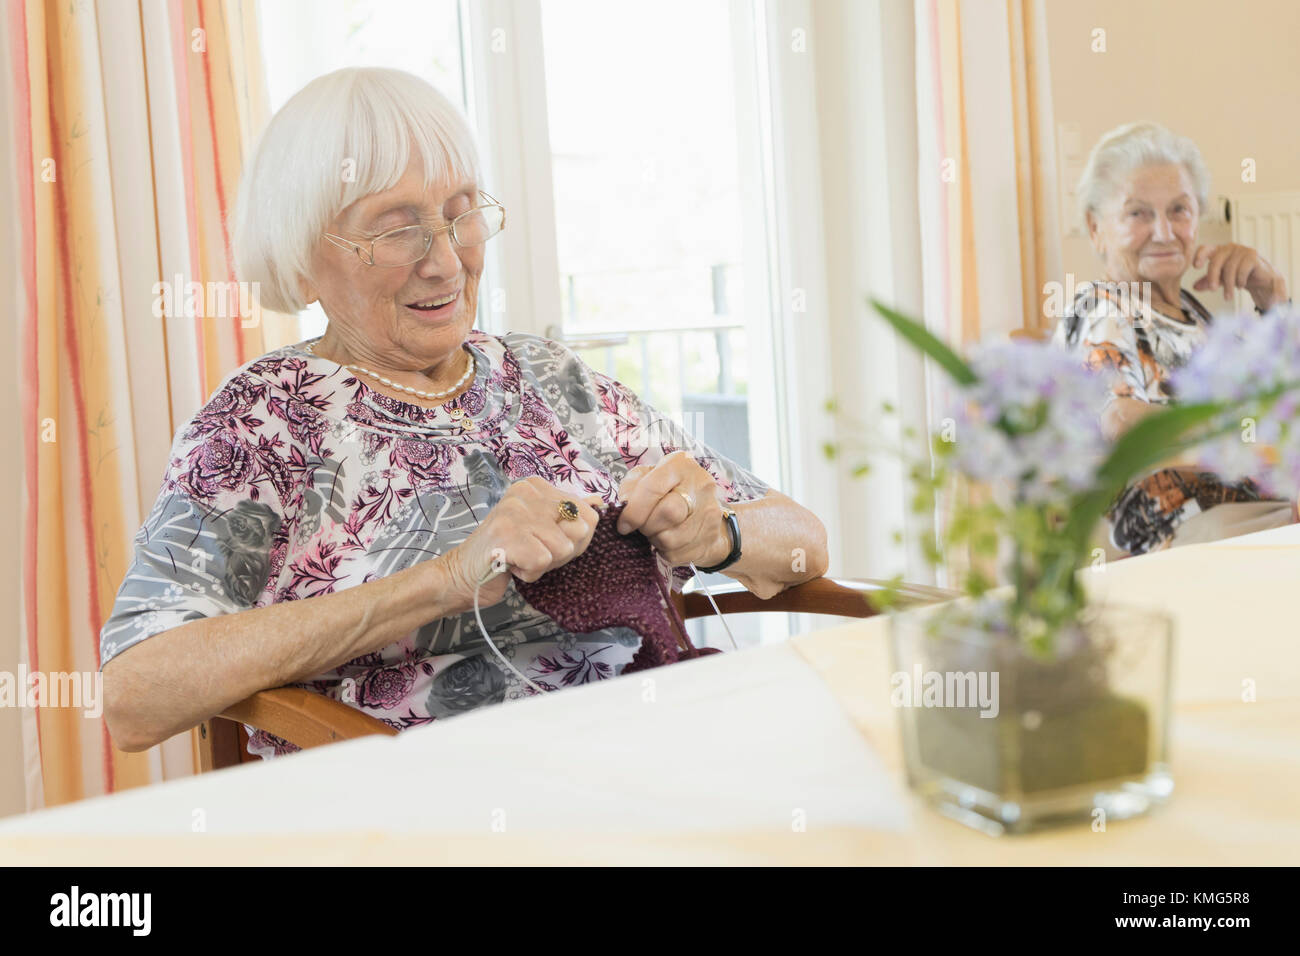 Senior woman crocheting in rest home Stock Photo